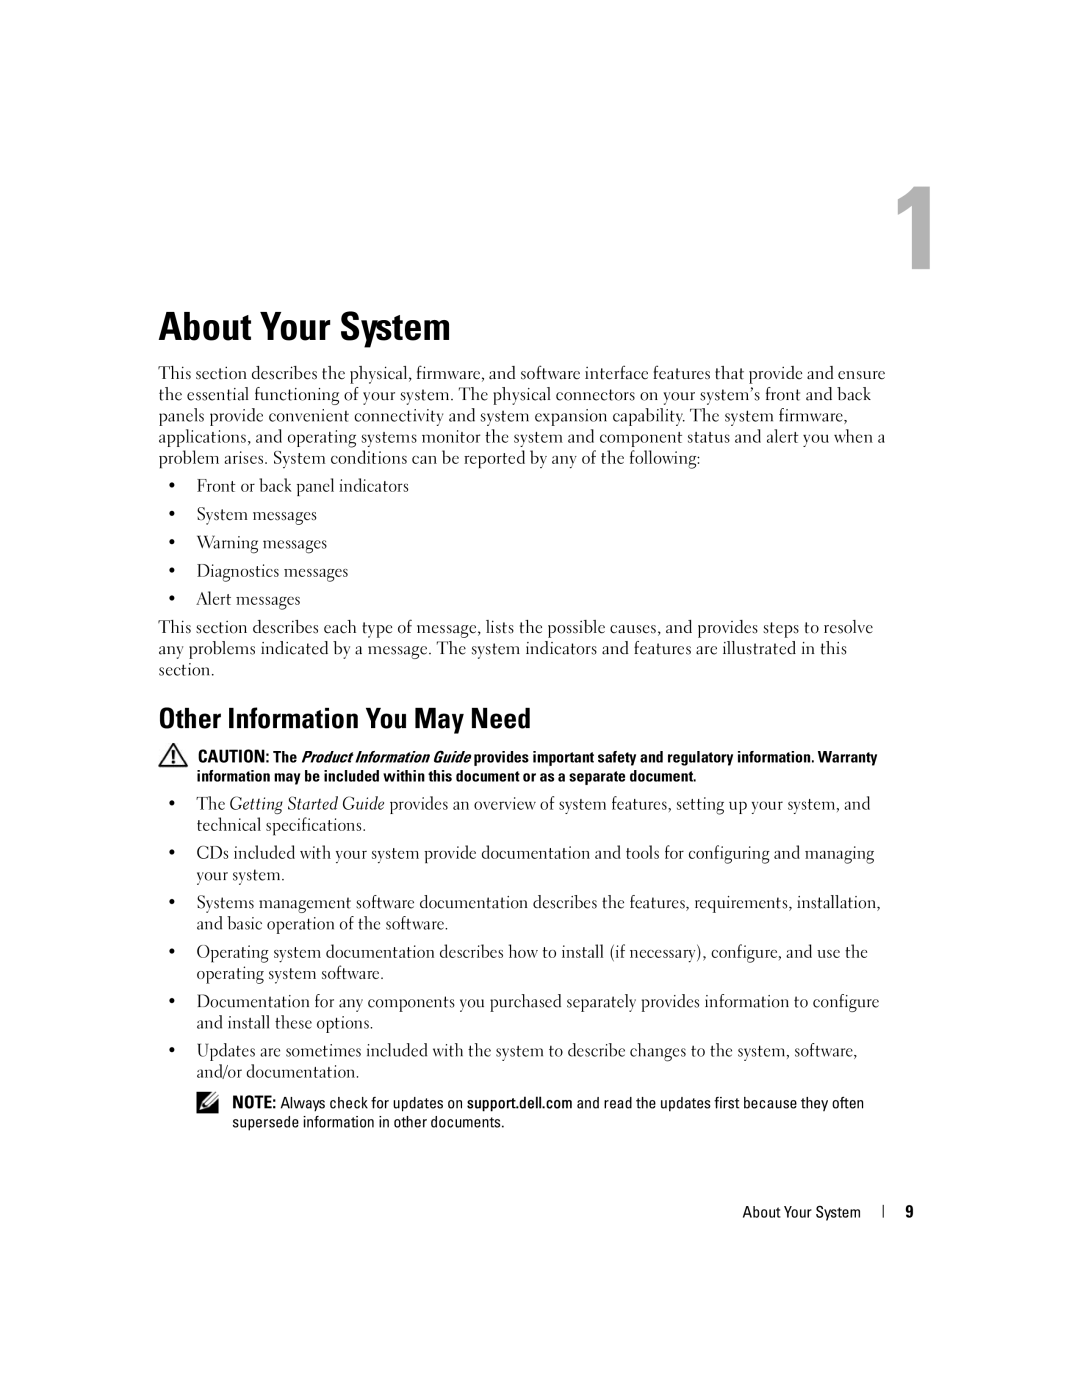 Dell SC1430 owner manual Other Information You May Need, About Your System 